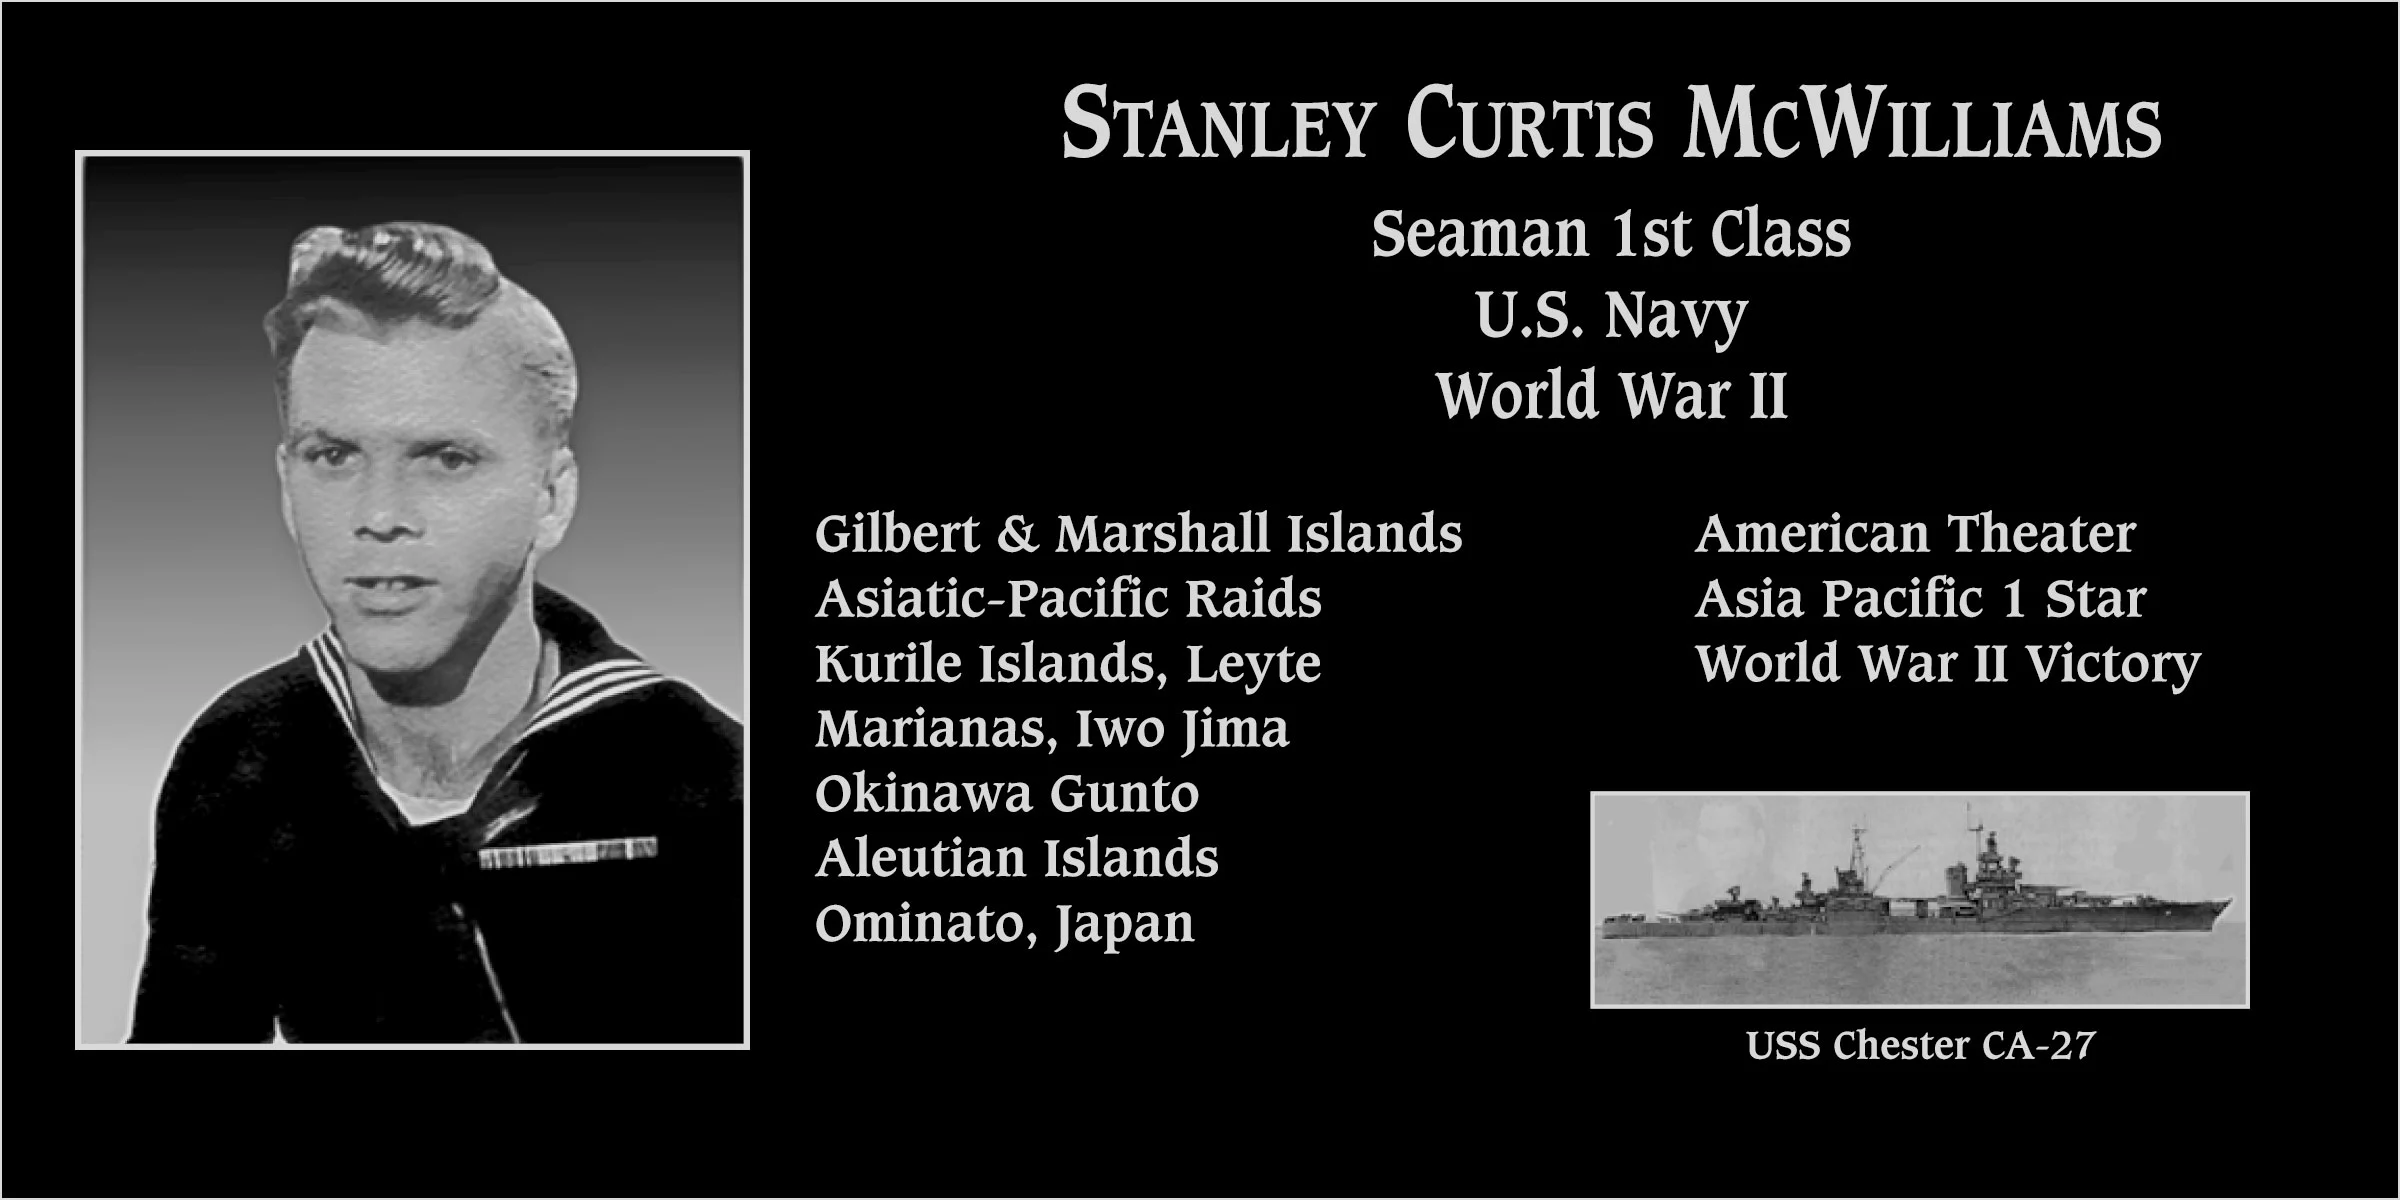 Stanley Curtis McWilliams